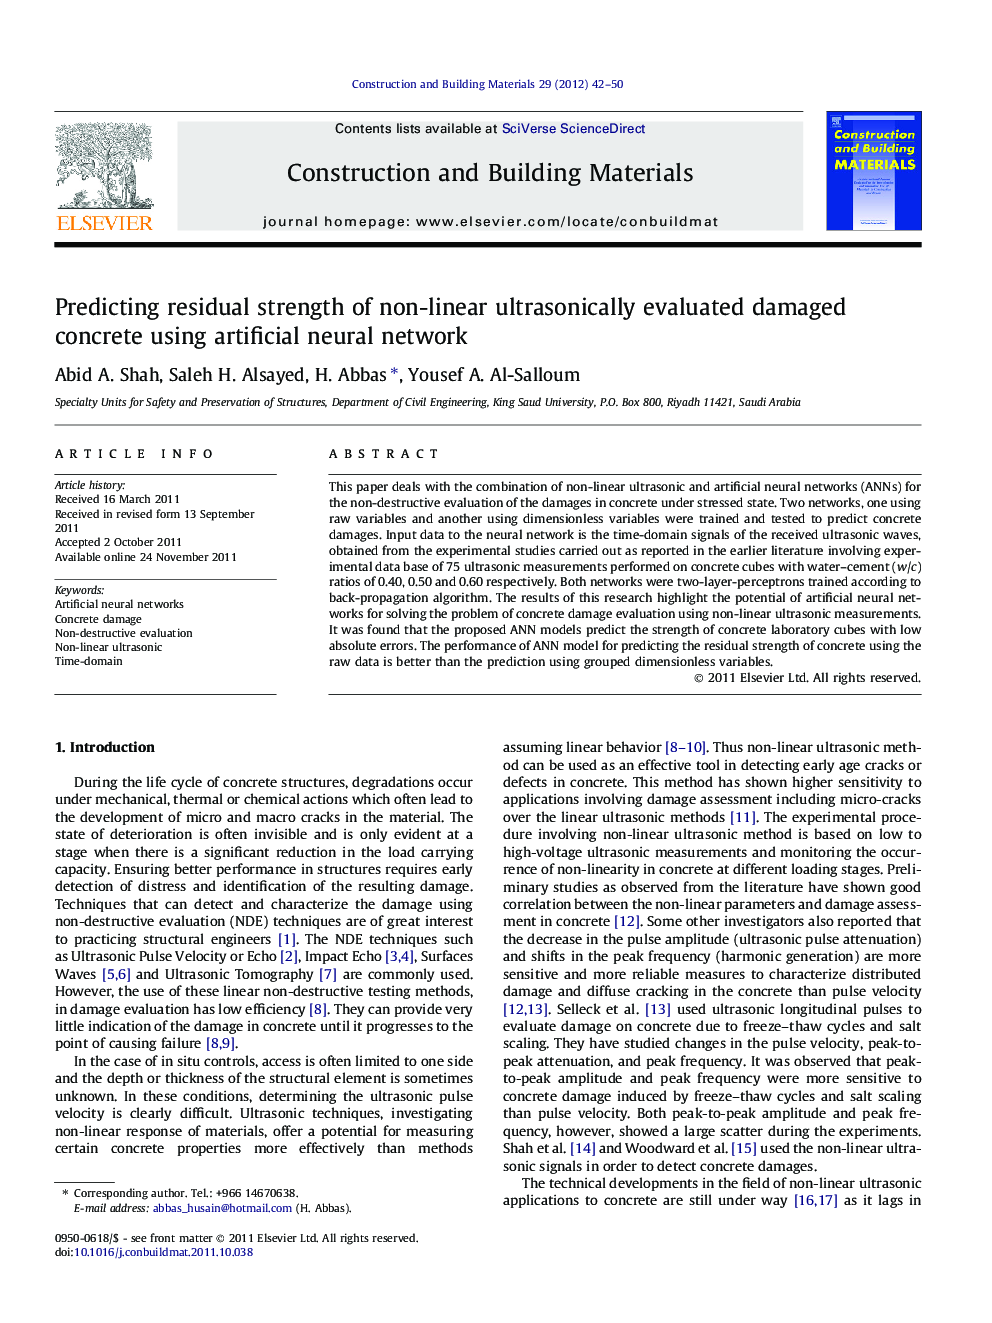 Predicting residual strength of non-linear ultrasonically evaluated damaged concrete using artificial neural network